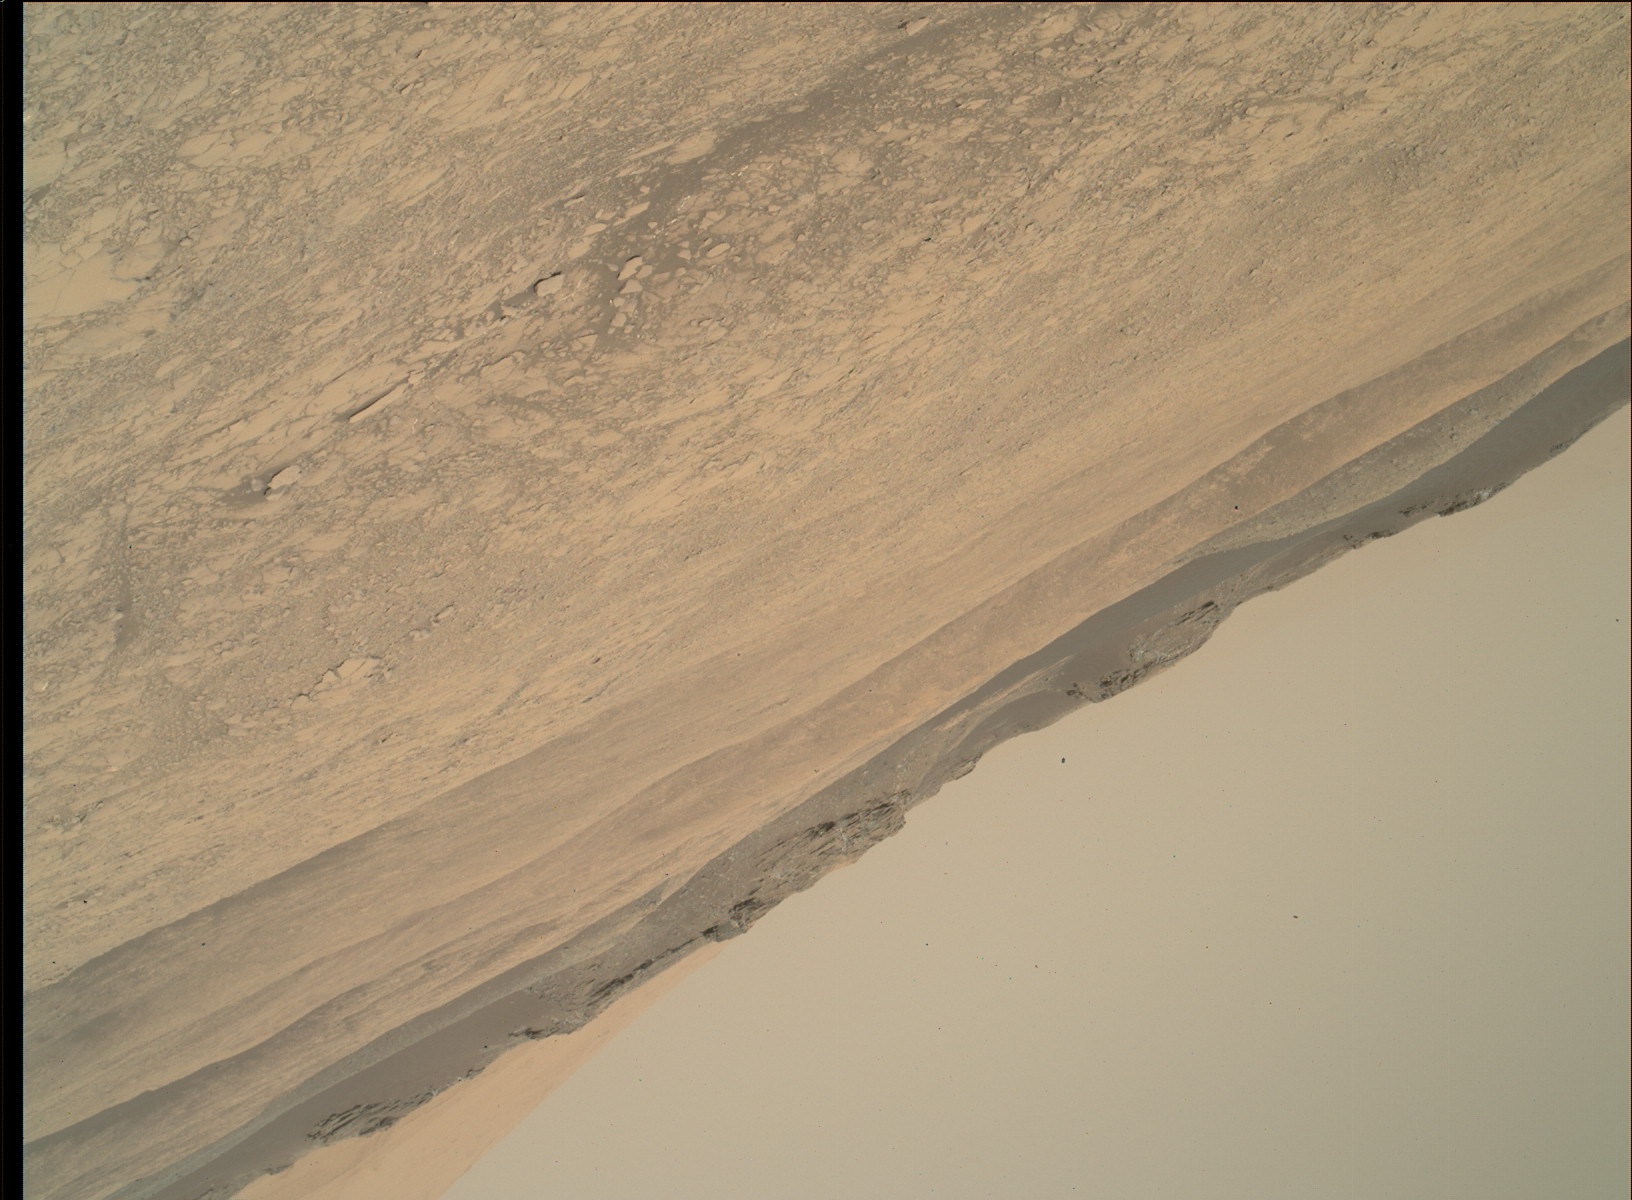 Nasa's Mars rover Curiosity acquired this image using its Mars Hand Lens Imager (MAHLI) on Sol 1410